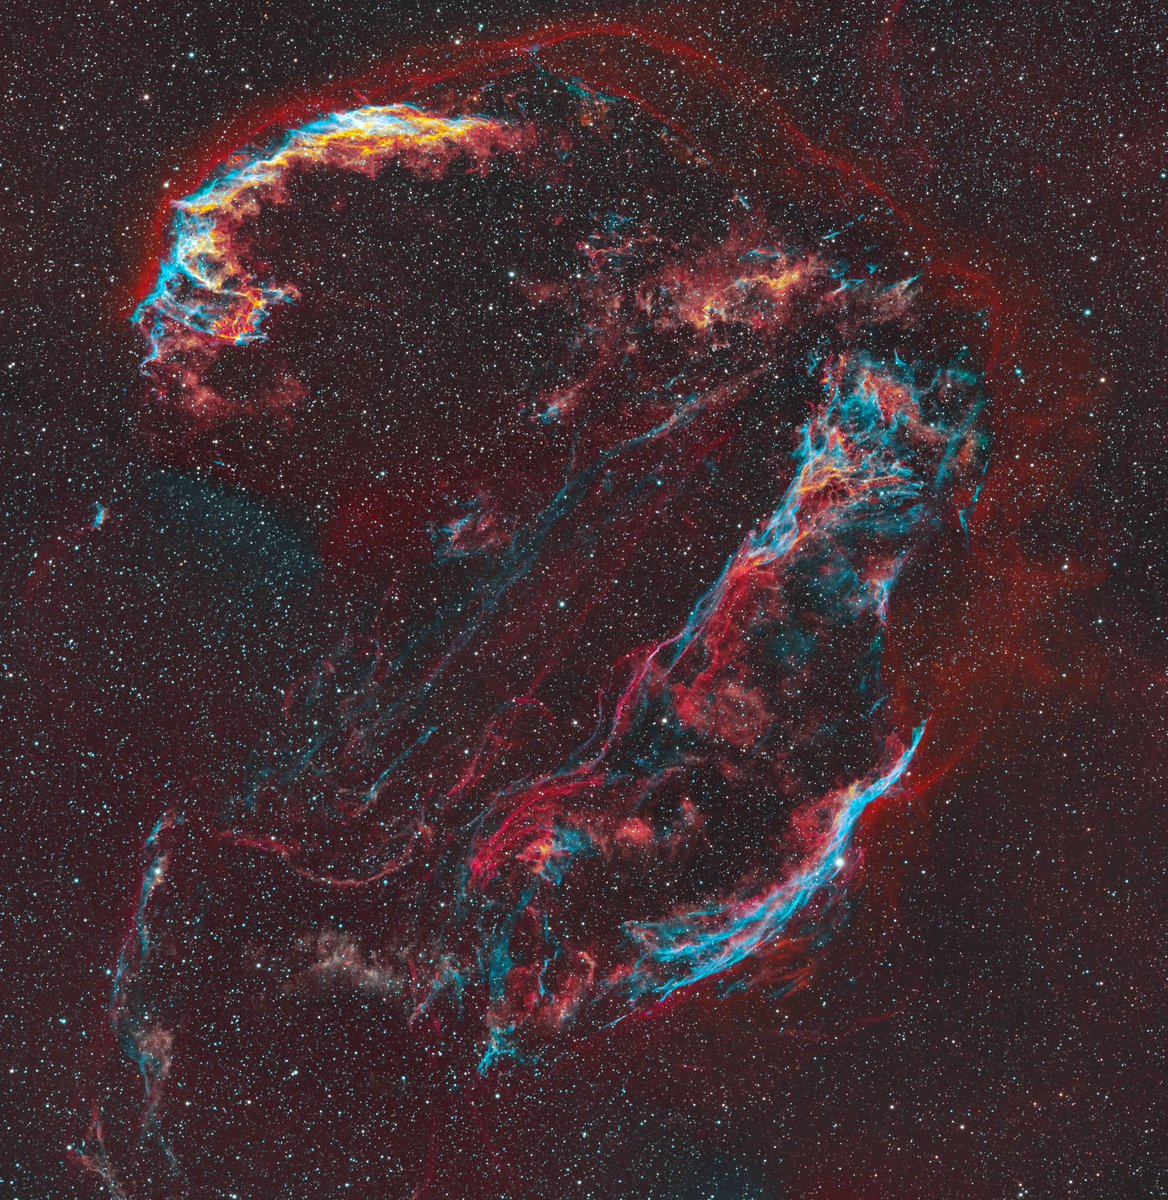 #veilnebula
#Astrophotography 
#astronomy #williamopticsgt71 #antlia3nmfilters 
23 hours 55 minutes HSO integration of a 4 panel mosaic using WOGT71 at 336fl. Best I can do as I am learning the mosaic process.
Have a great week!!